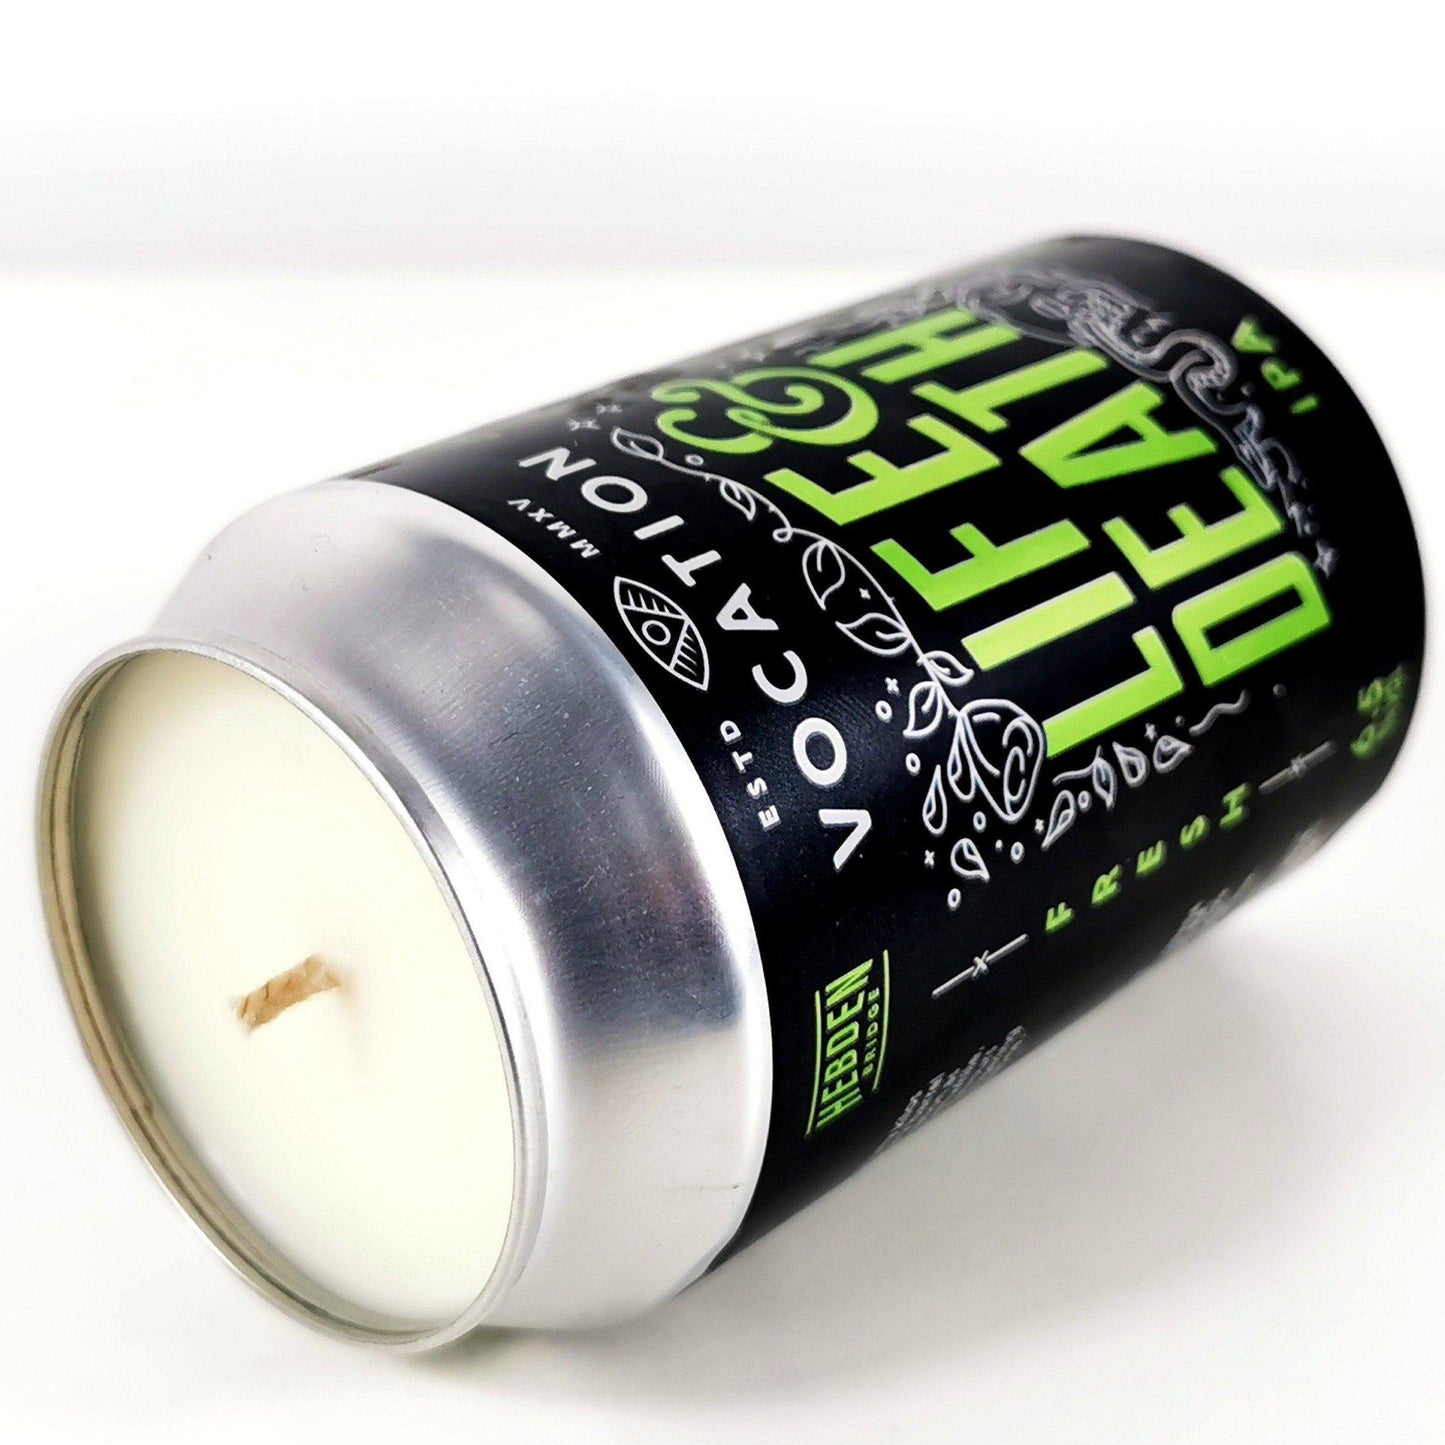 Vocation Life & Death IPA Craft Beer Can Candle-Beer Can Candles-Adhock Homeware